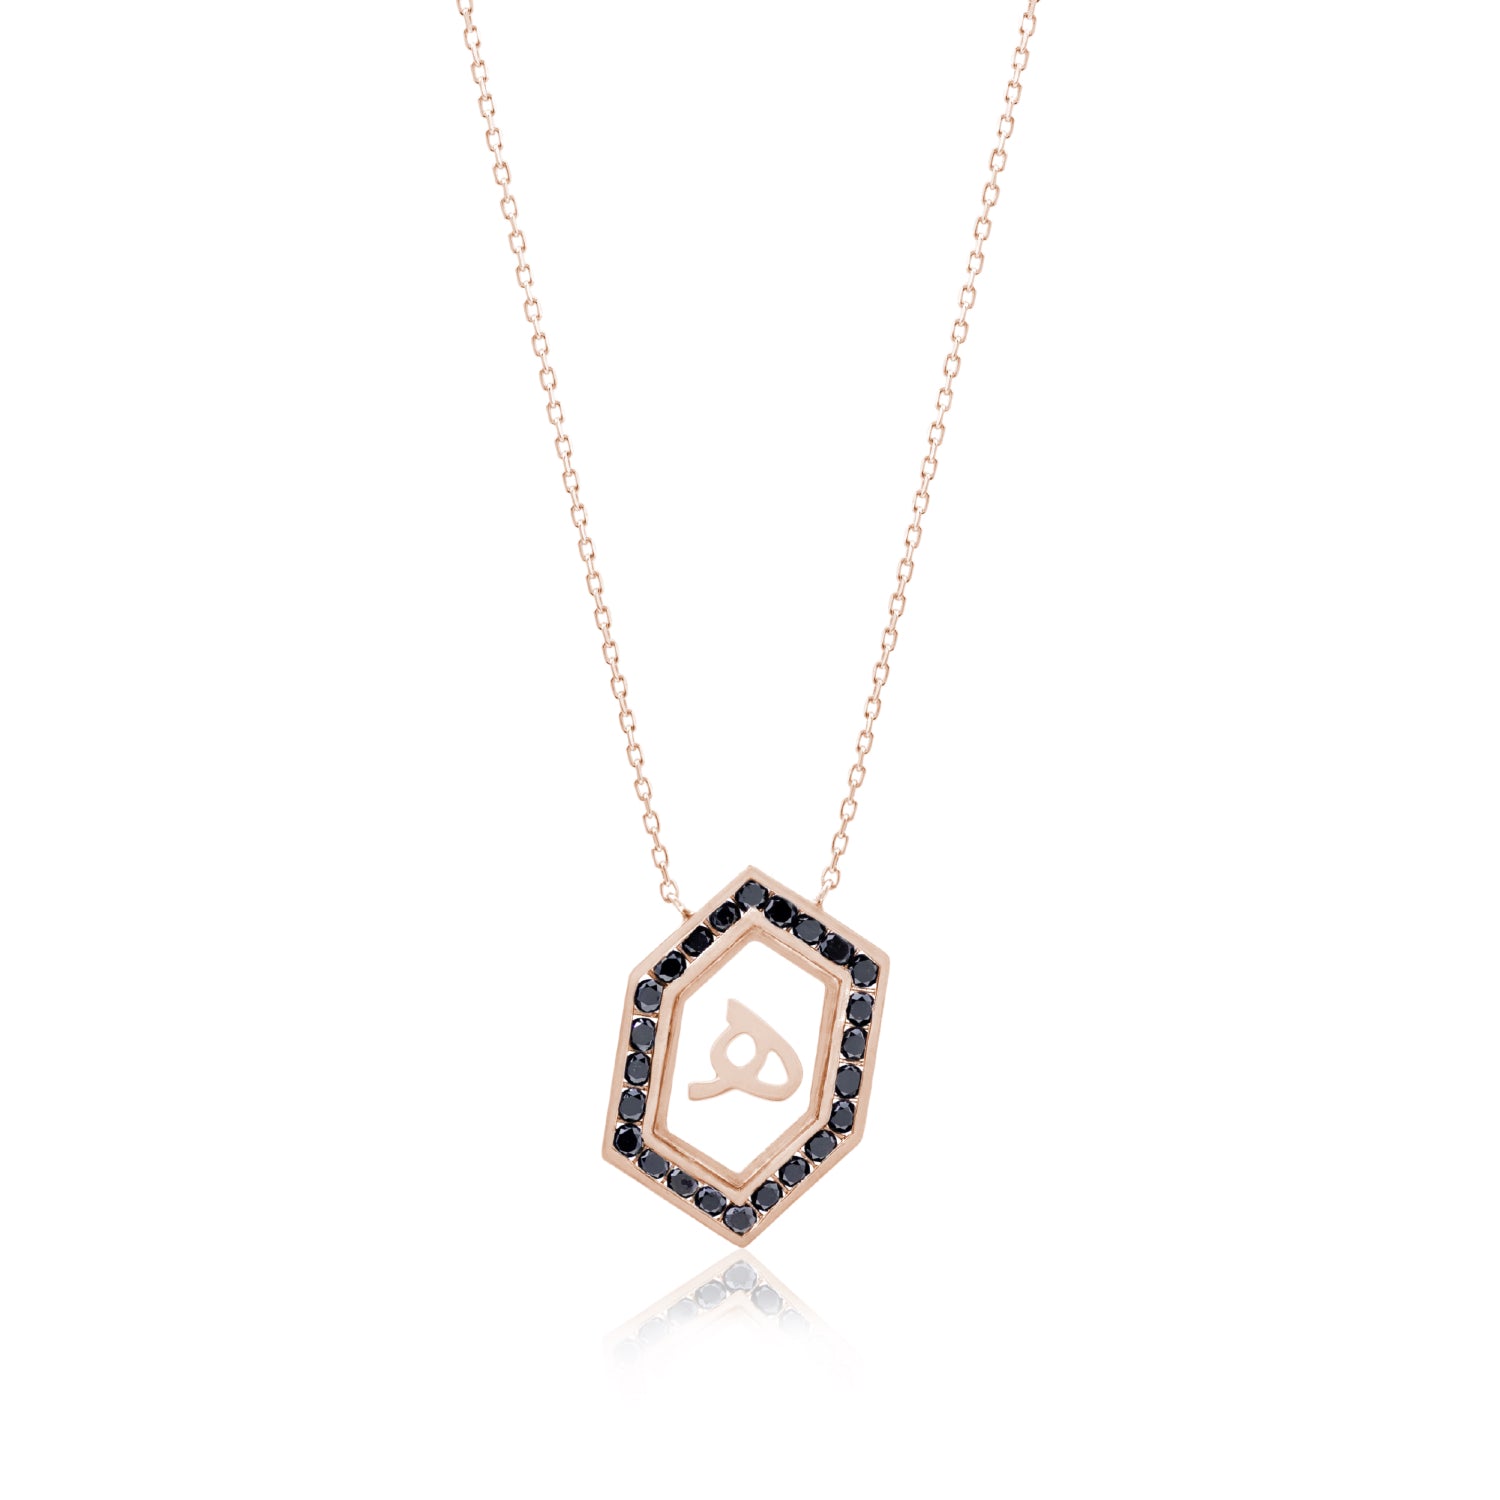 Qamoos 1.0 Letter هـ Black Diamond Necklace in Rose Gold